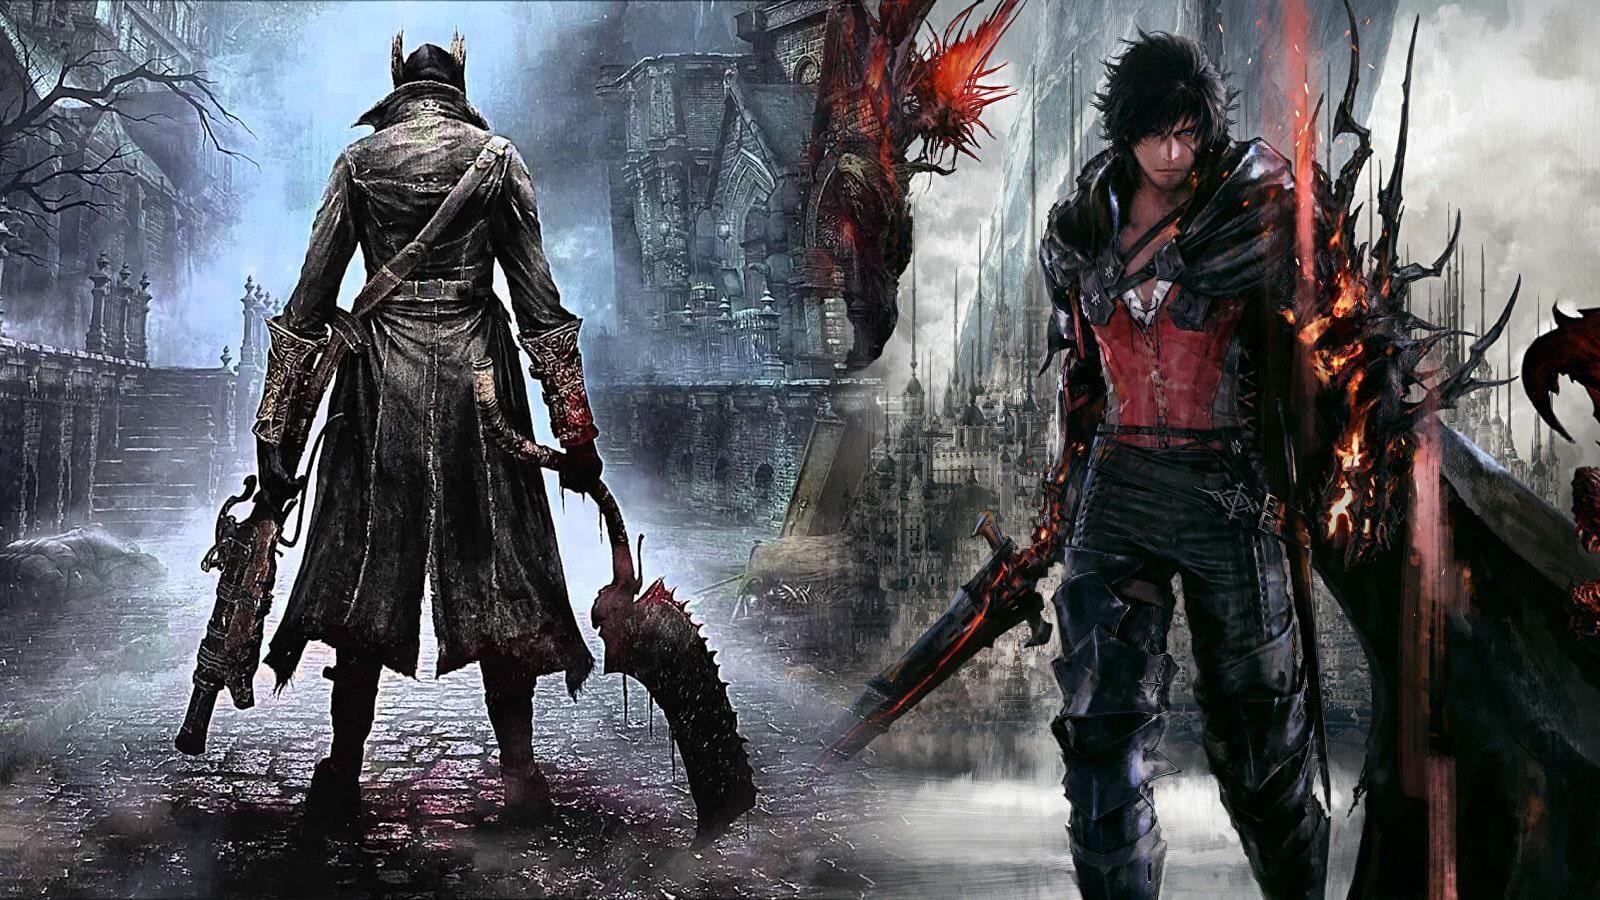 Final Fantasy 16 devs worked on canceled game almost identical to Bloodborne